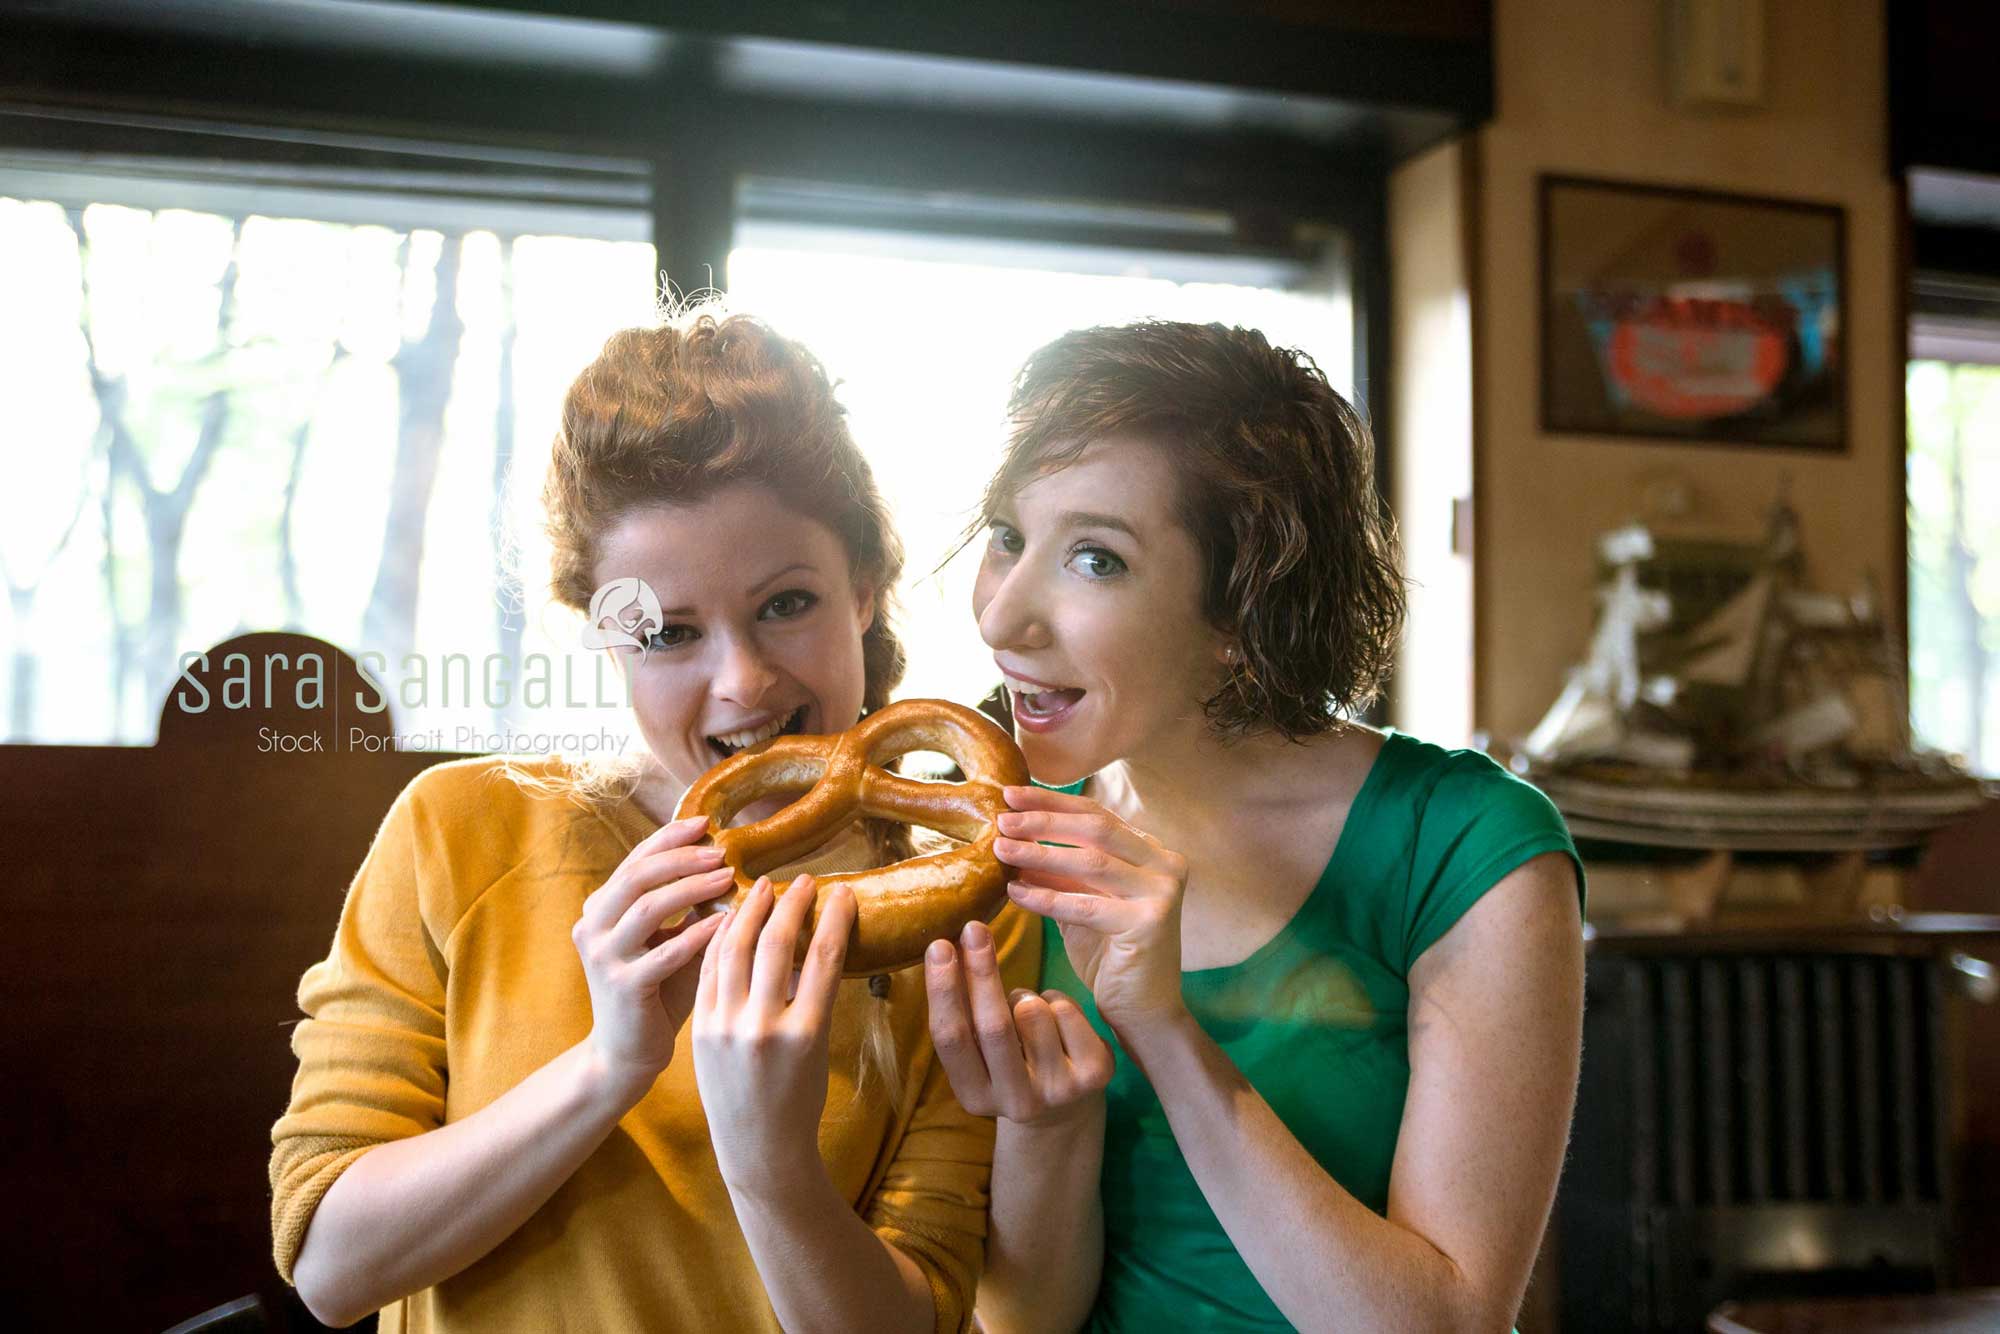 Two girlfriends eating pretzel, looking at camera indoor setting